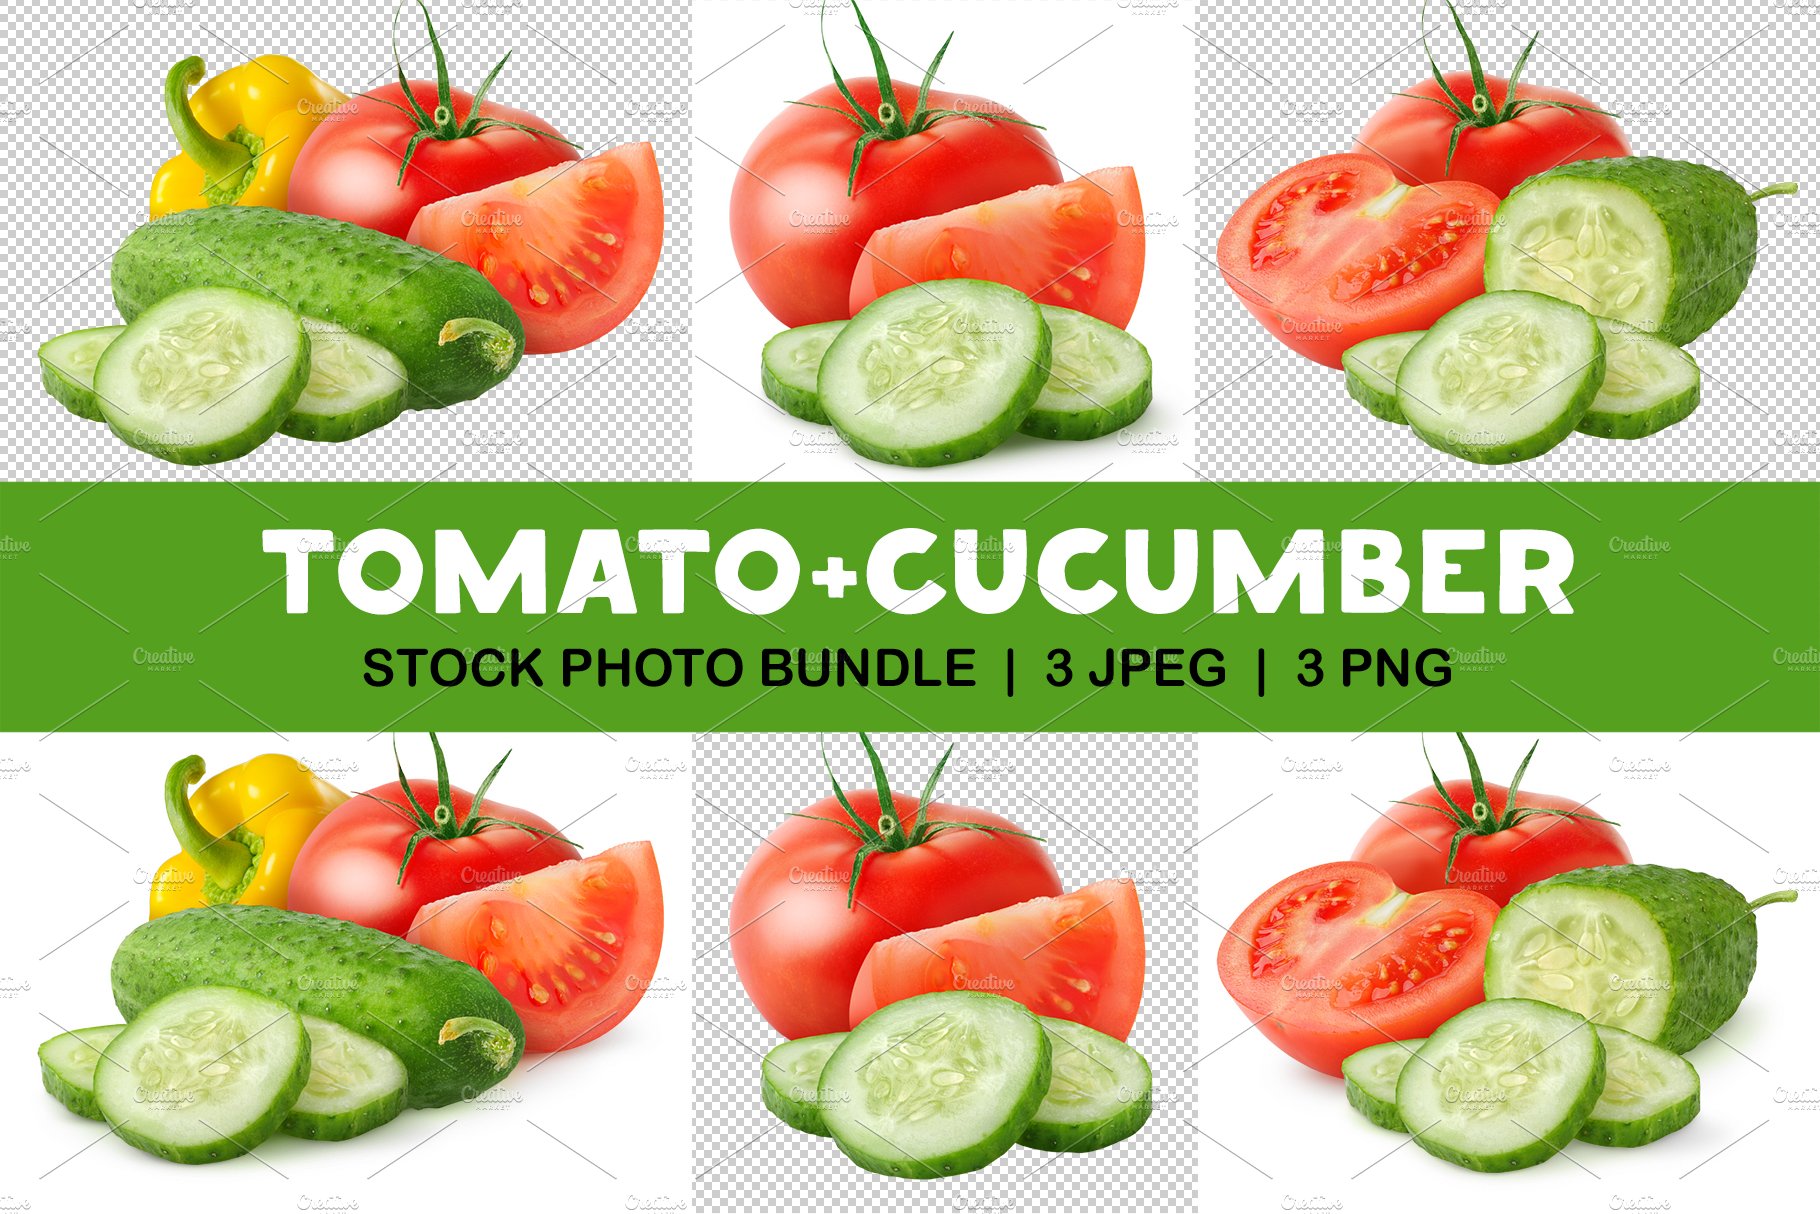 Tomato and cucumber cover image.